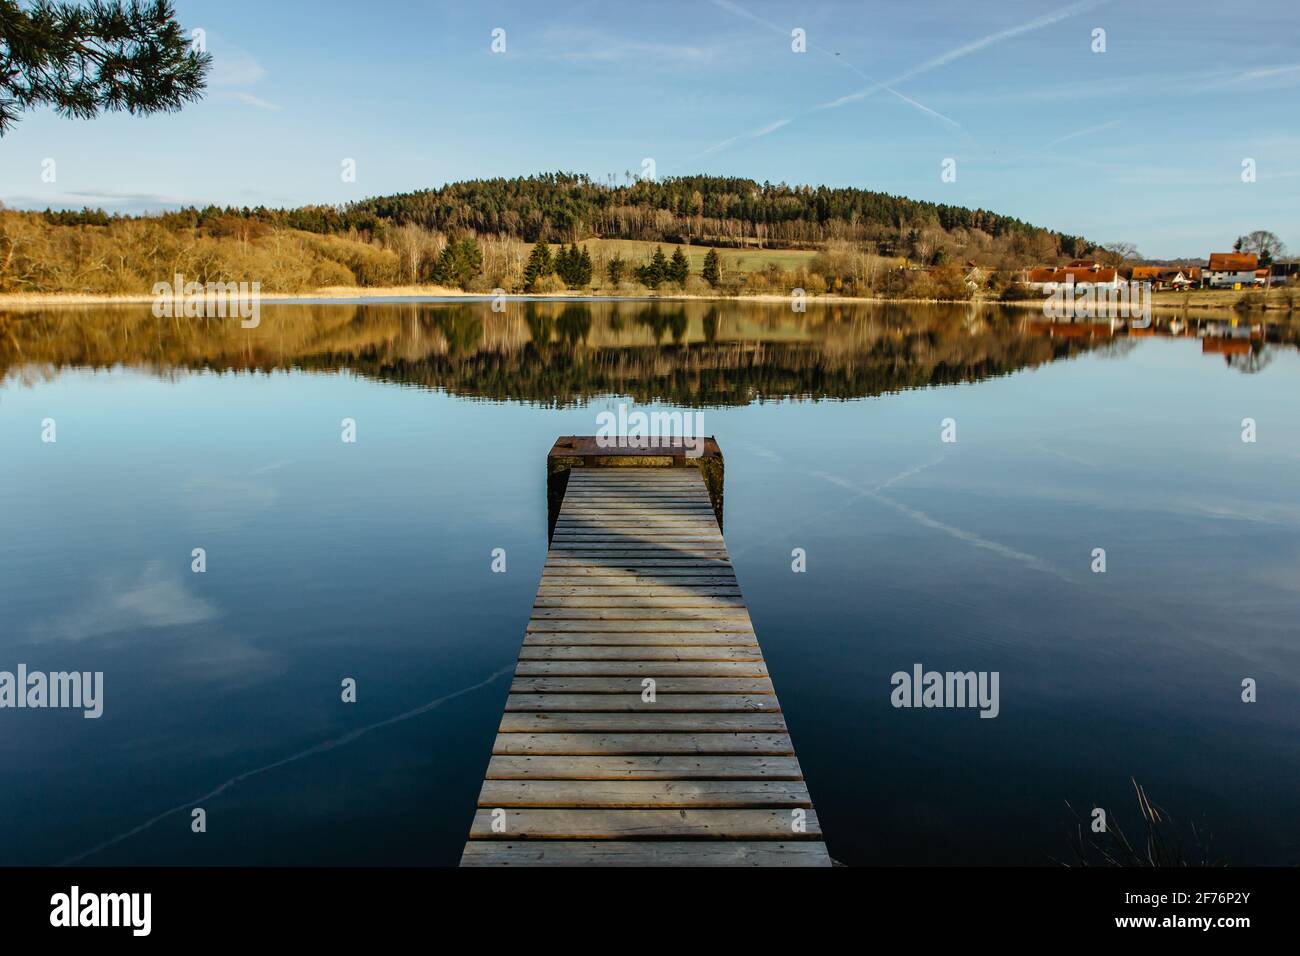 Empty wooden pier on lake. Spring pond village in background. Sunny calm idyllic weather. Serenity scenery.Meditation without people.Motivation quote. Stock Photo